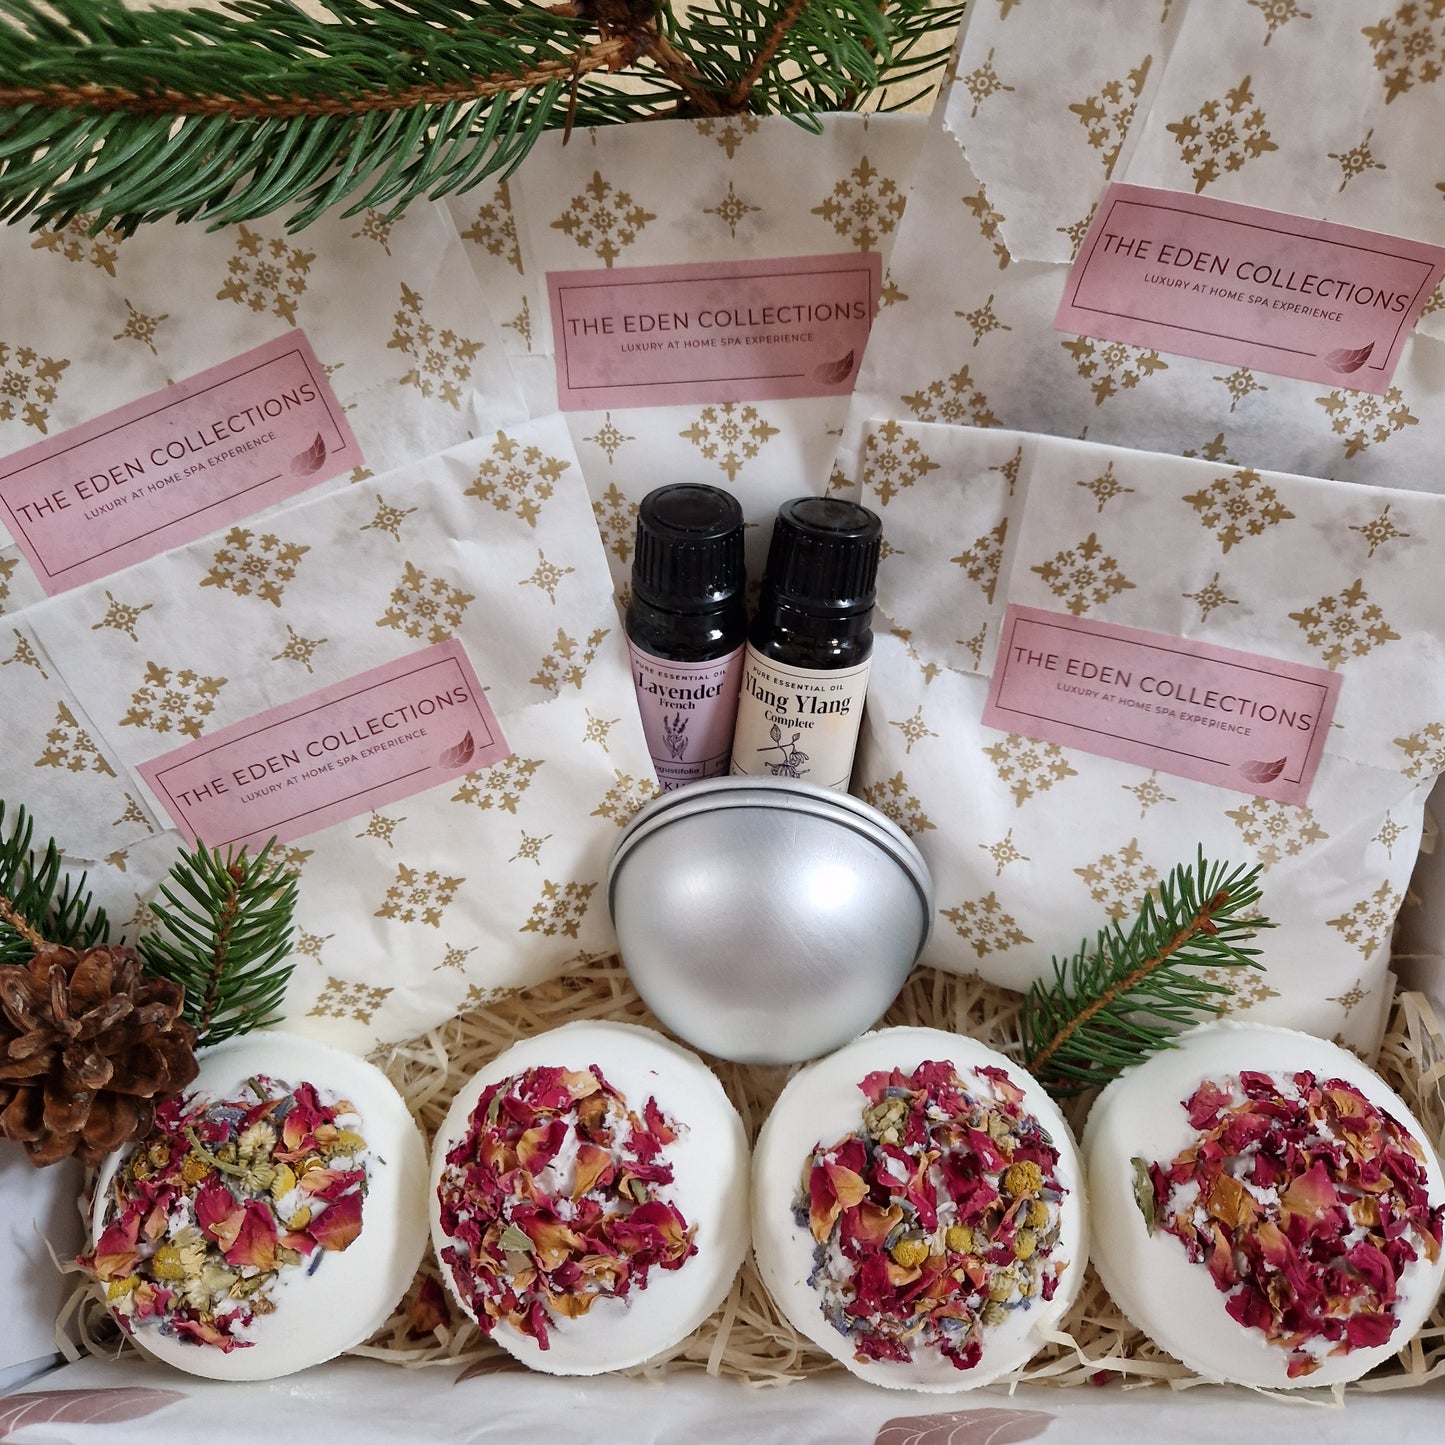 DIY Bath Bomb Making Kit by The Eden Collections